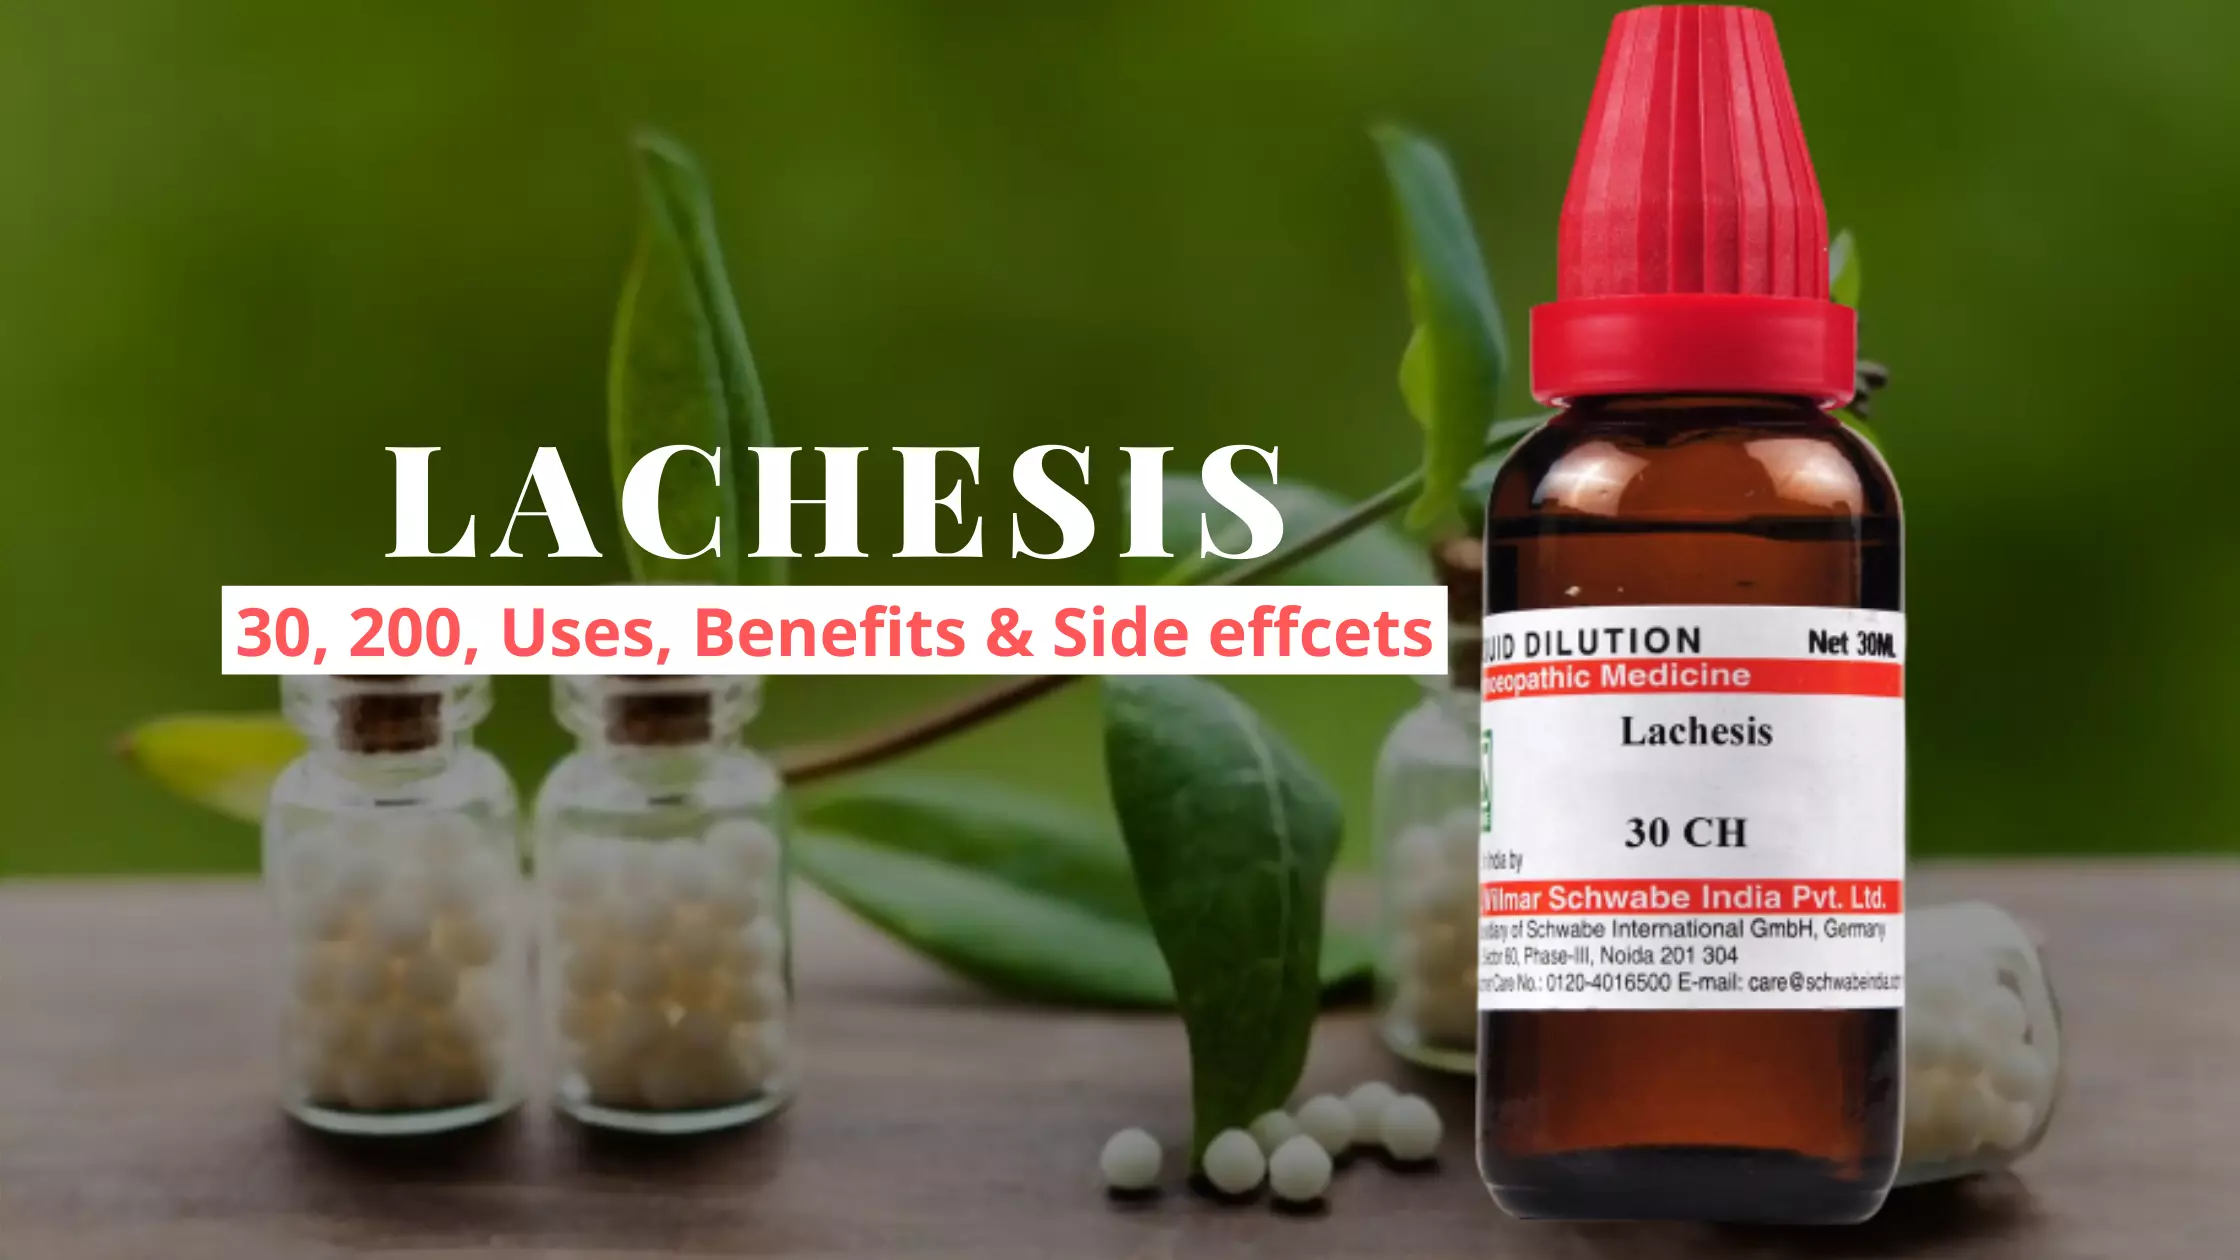 Lachesis 30, 200, 1M – Uses, Dosage, Benefits Side Effects